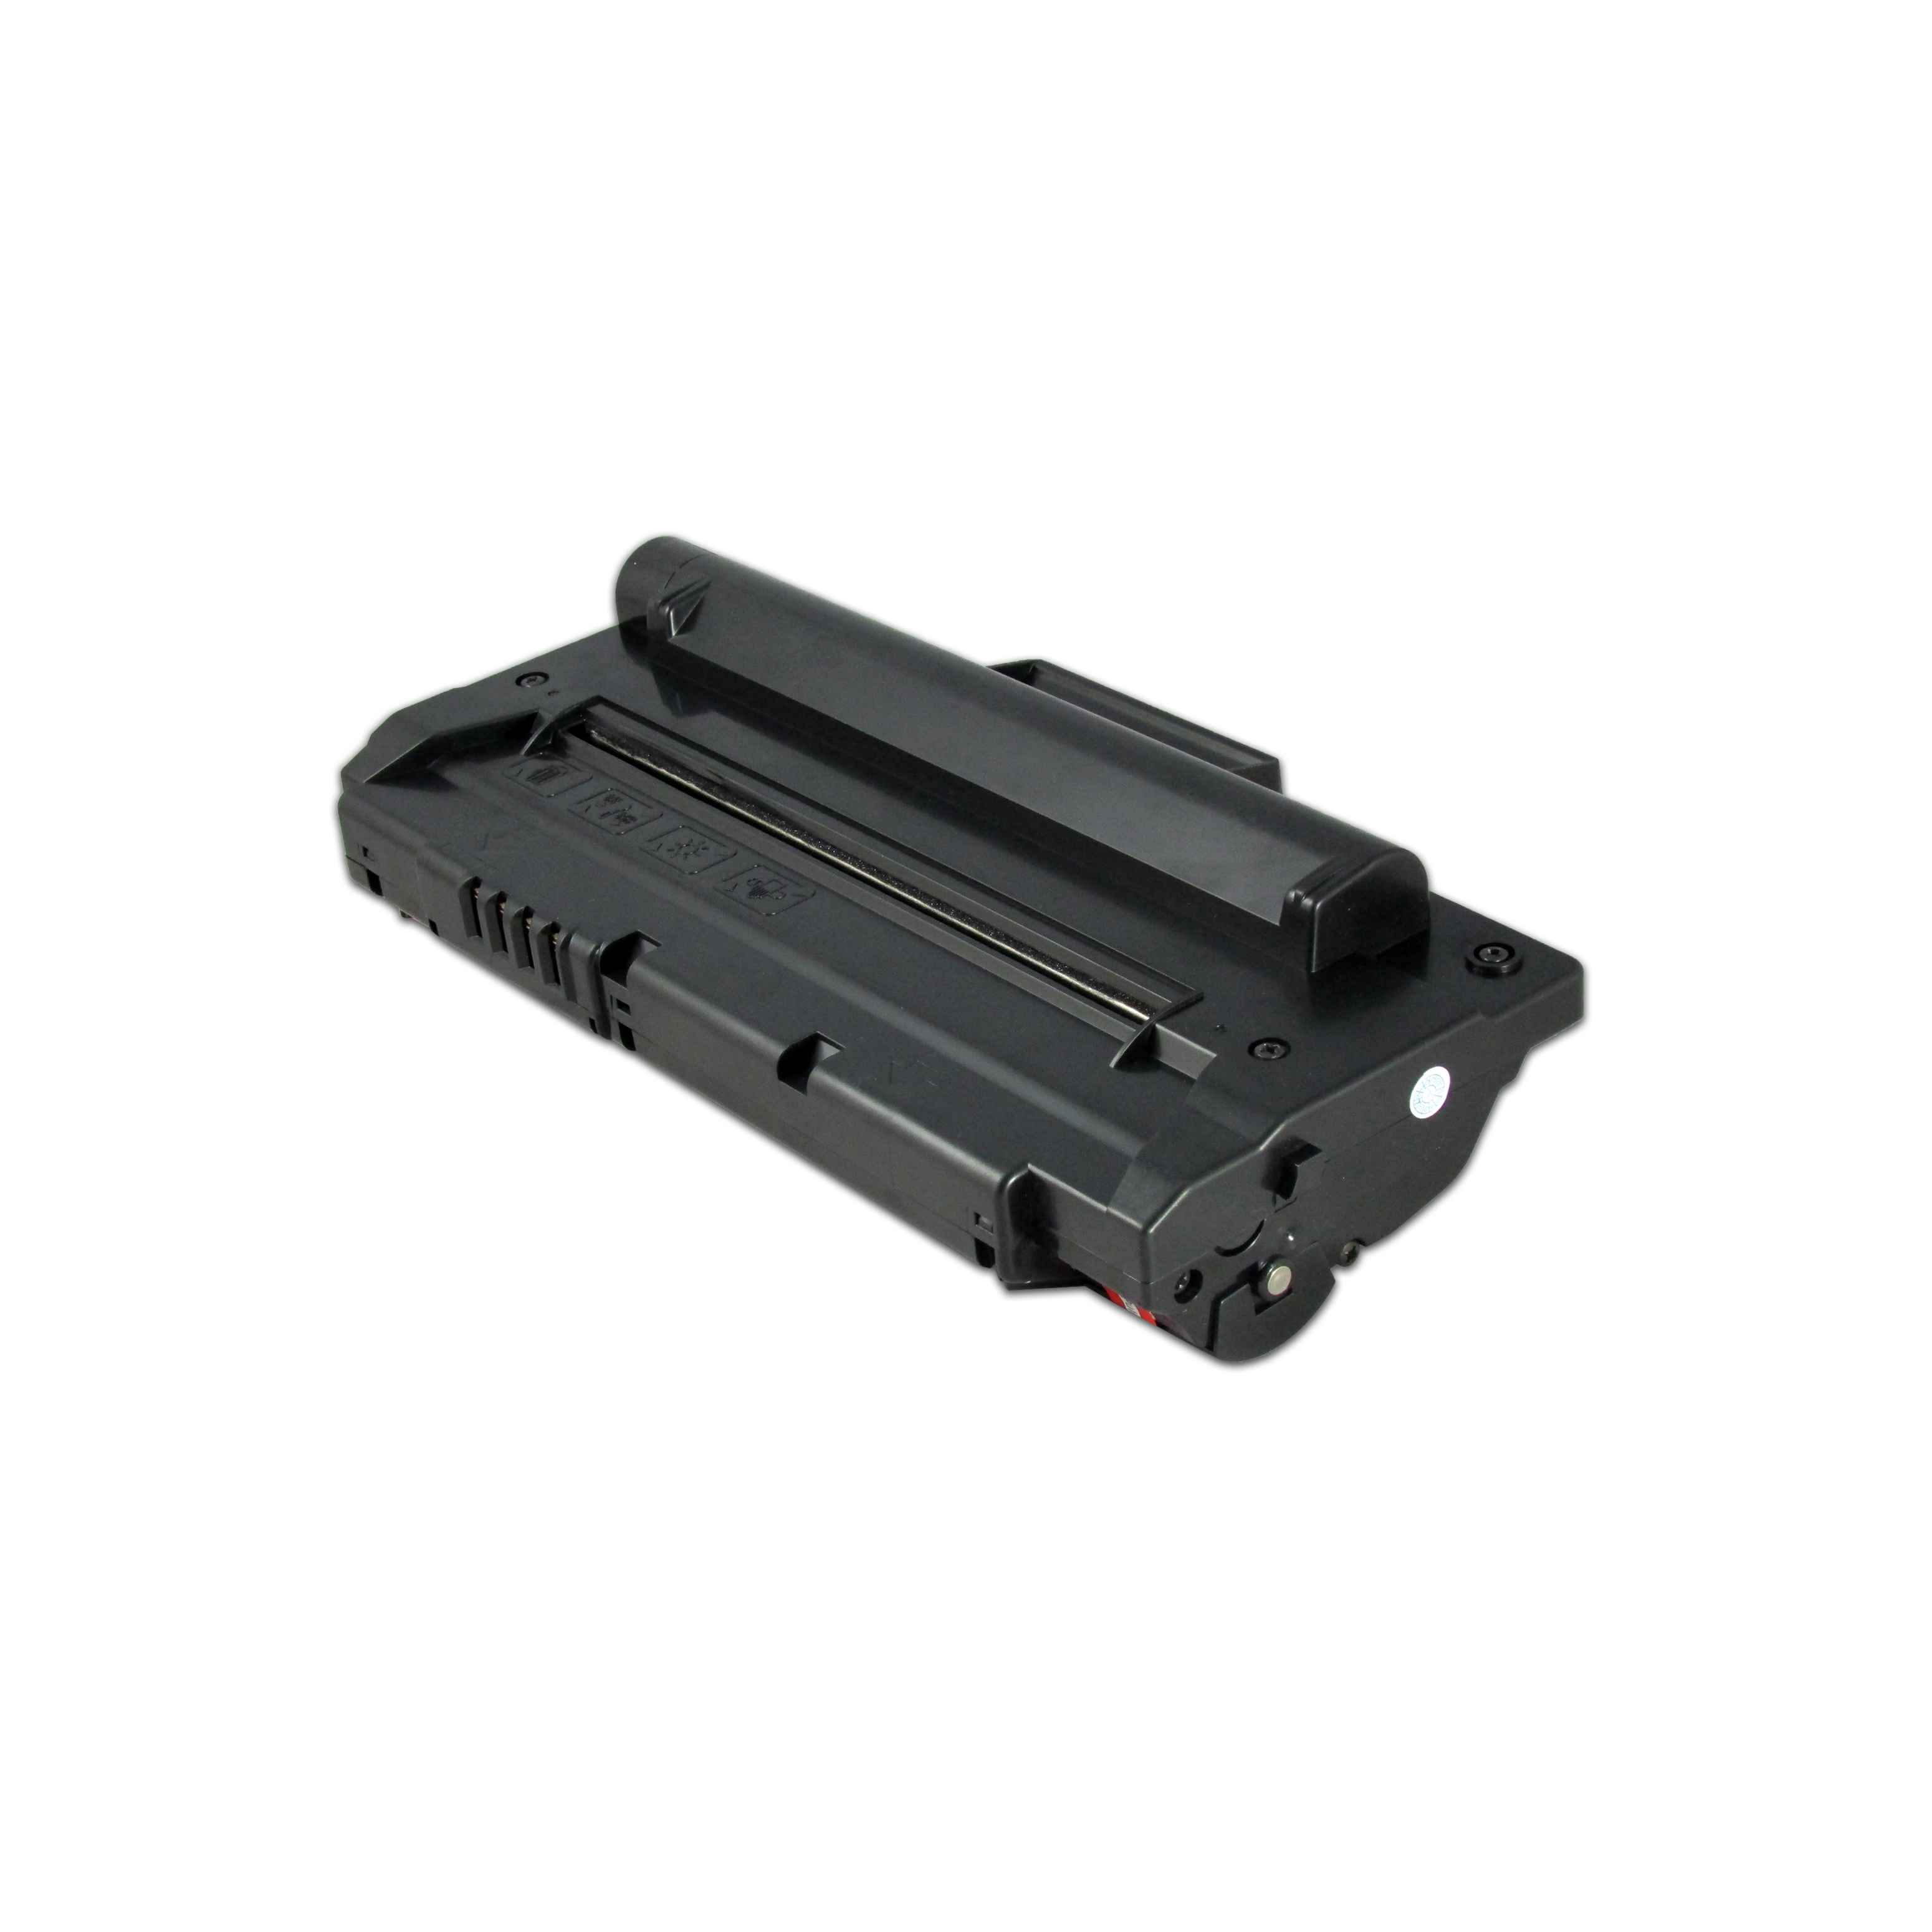 TN560 toner cartridge Use For Brother HL-5030/5040.etc